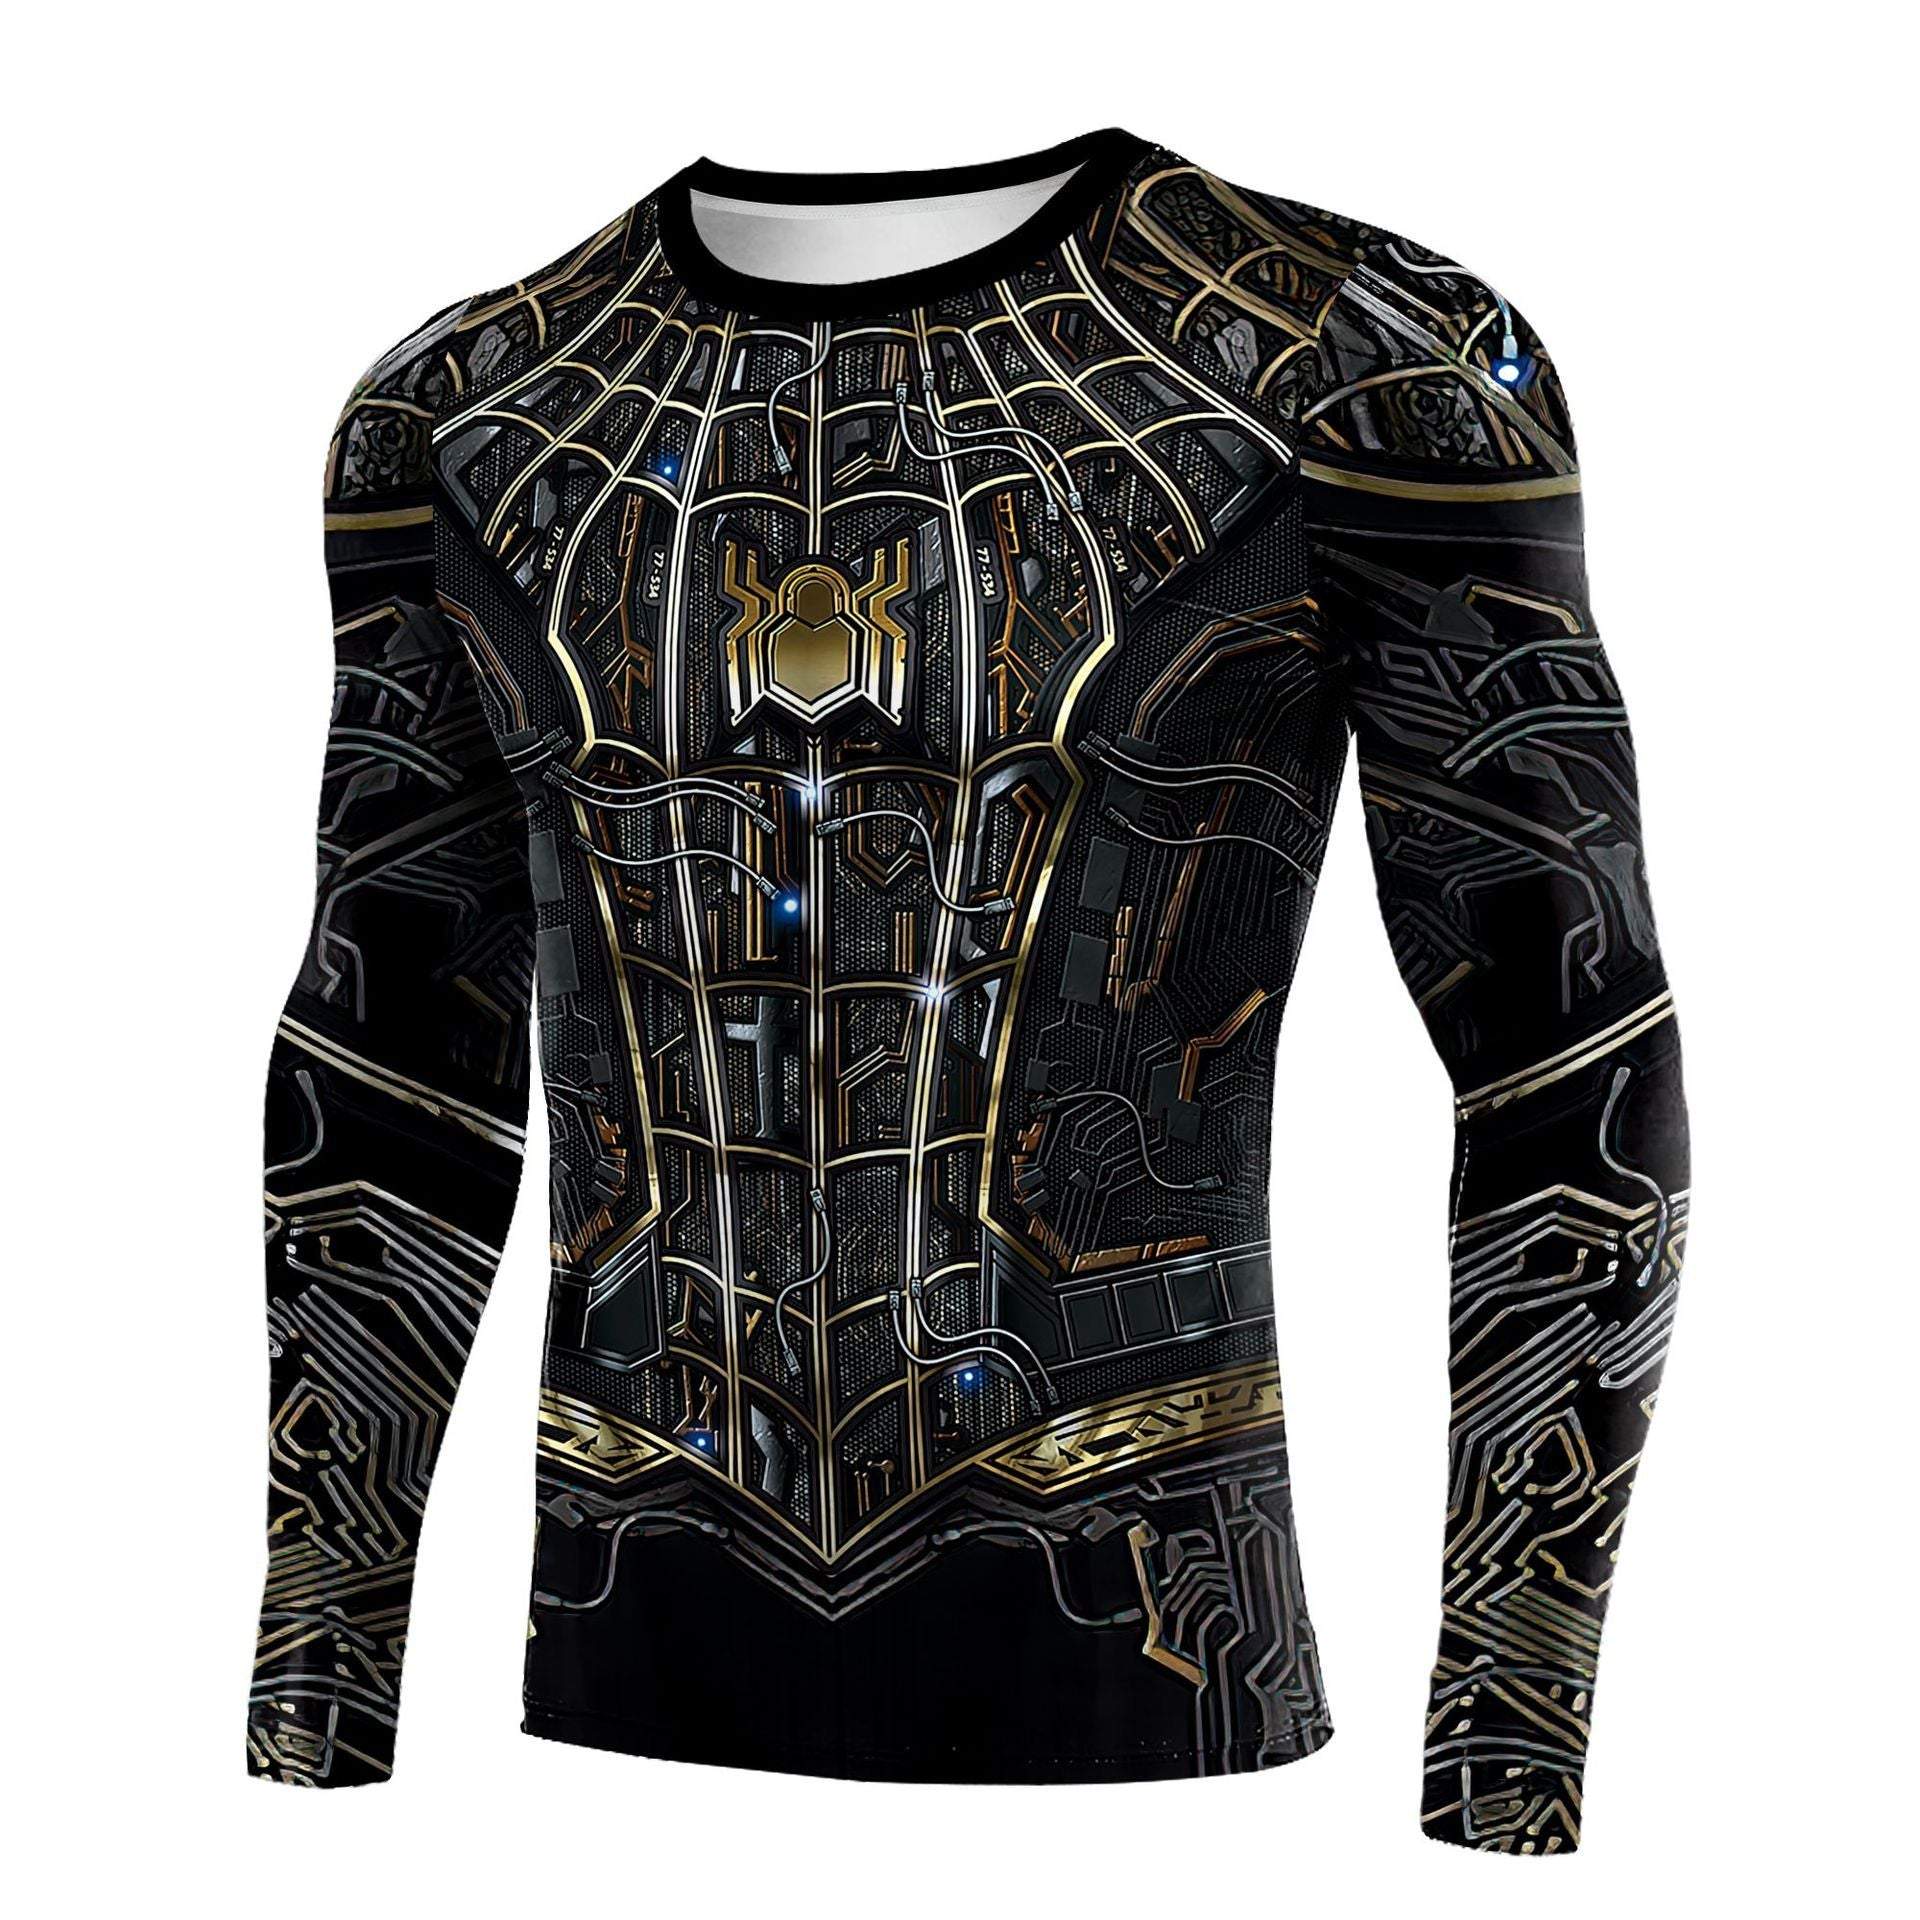 Spider-Man T Shirt Cosplay Costume Long Sleeve Printed Top Casual Tight Sportswear Tee For Men